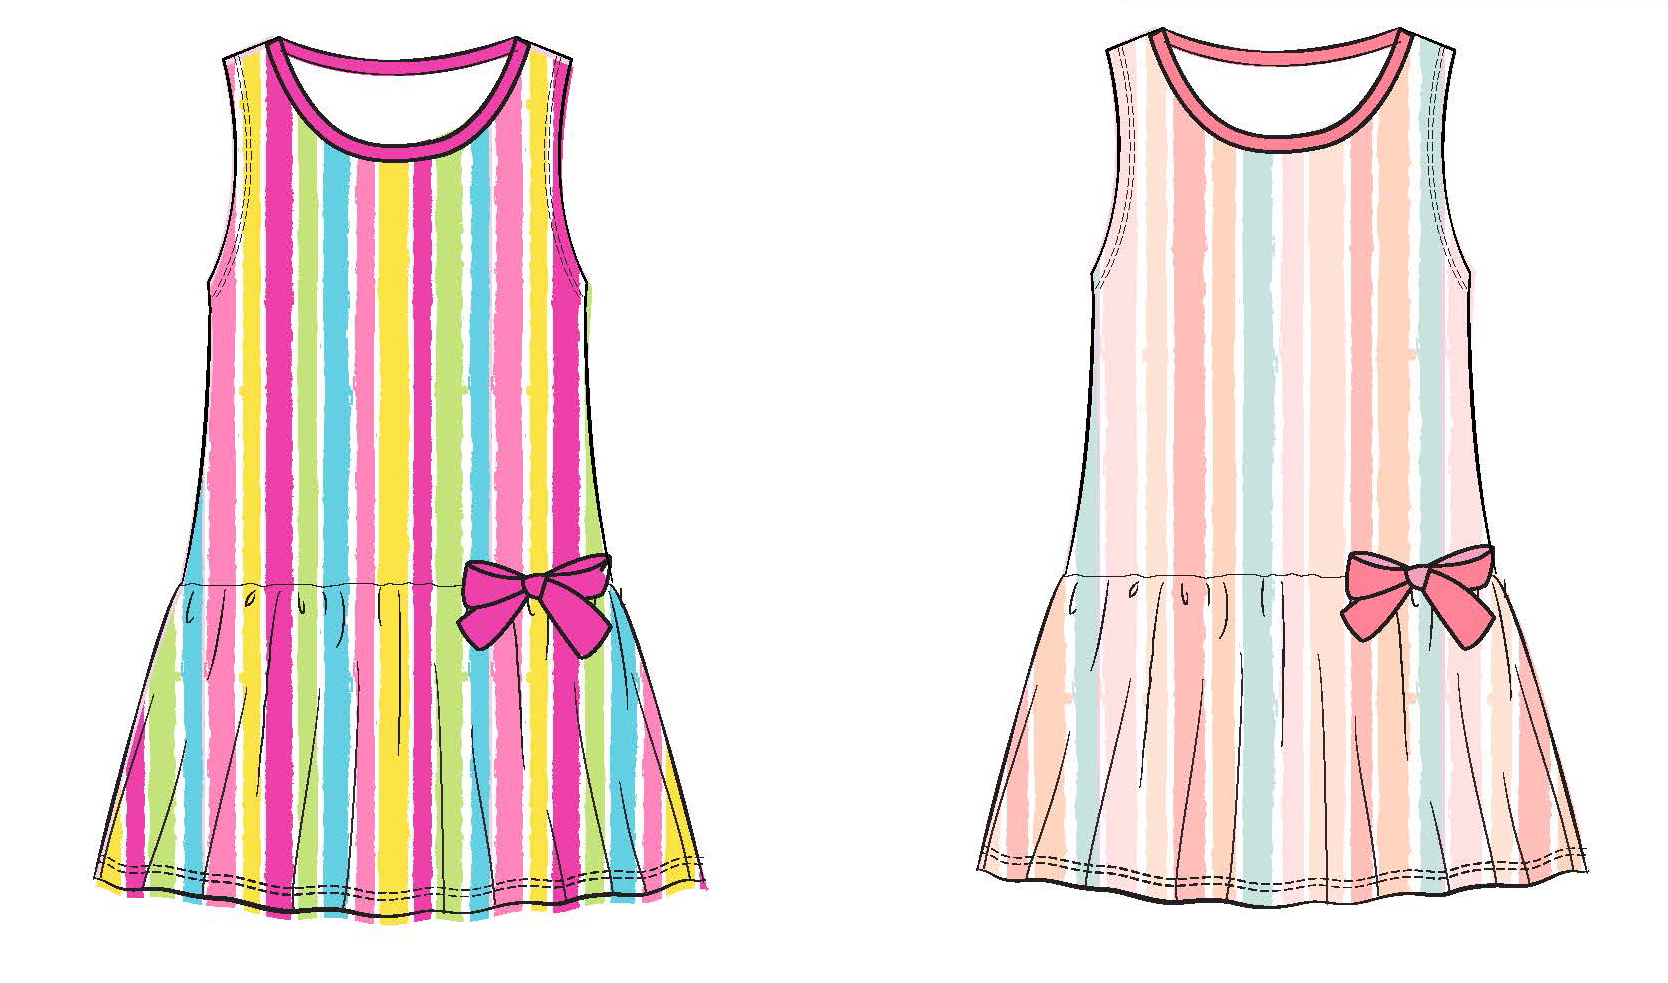 Girl's Sleeveless Knit Swing DRESS w/ Embroidered Bow - Two Tone Rainbow Stripes - Size 4-6X